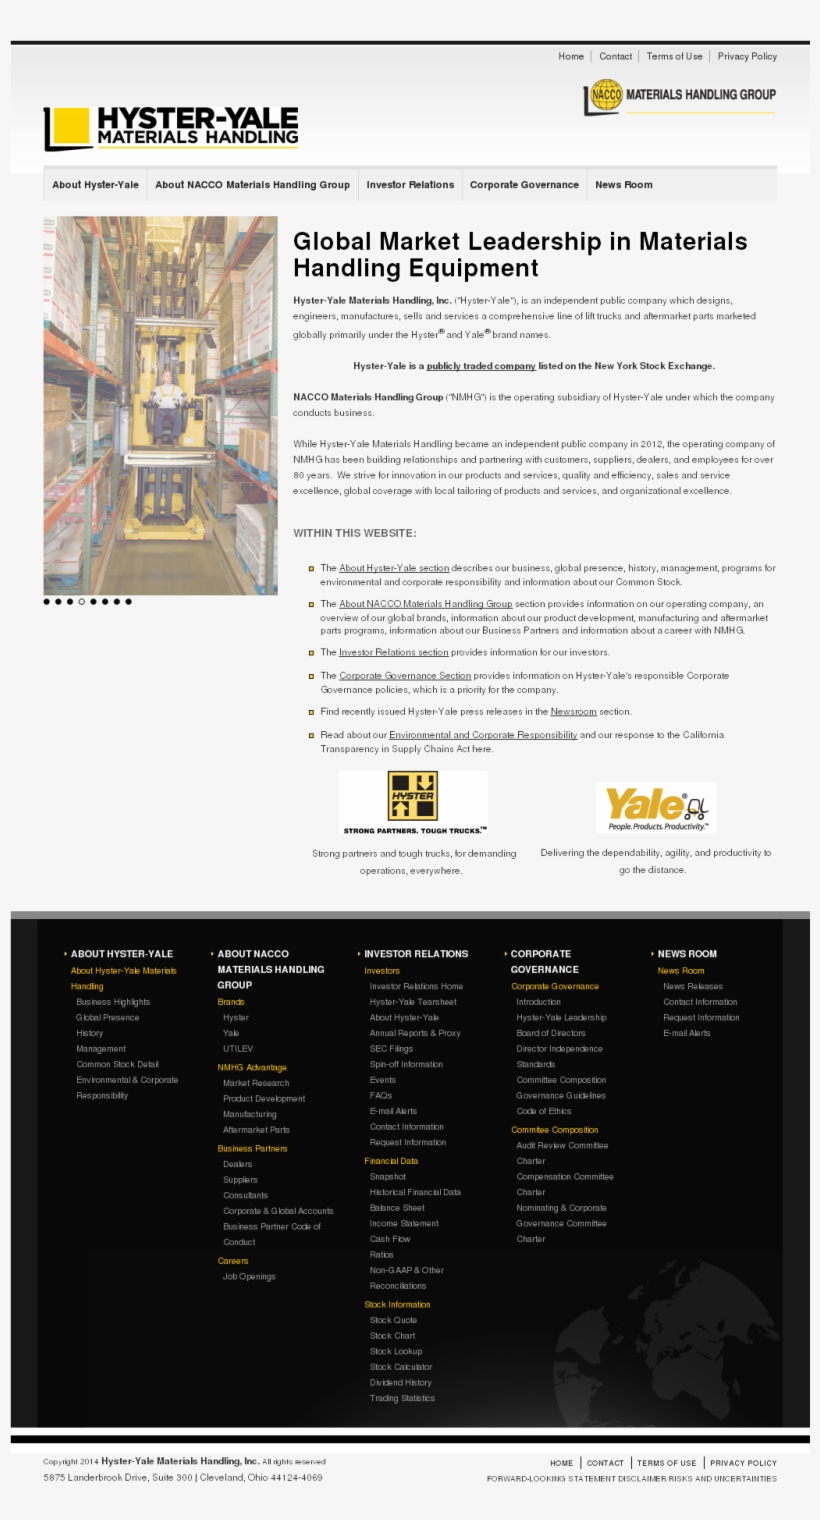 Balyo Announces 10 Year Renewal Of Contract With Hyster - Nexus 7, transparent png #6113420